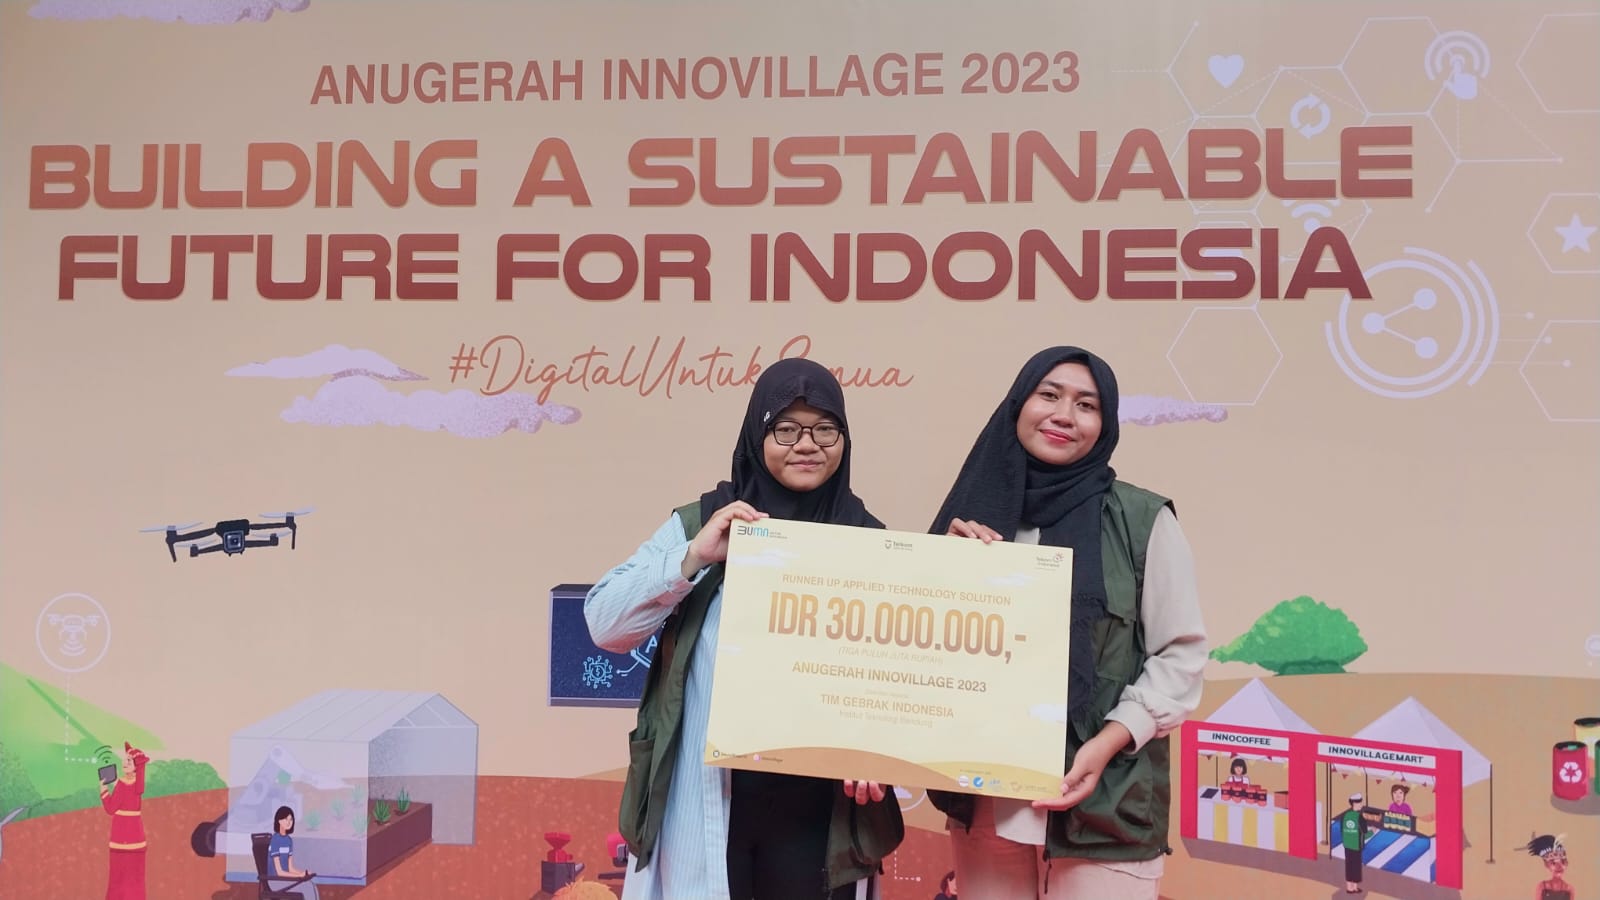 Team Gebrak Indonesia from the Institut Teknologi Bandung won the Innovillage 2023 Competition